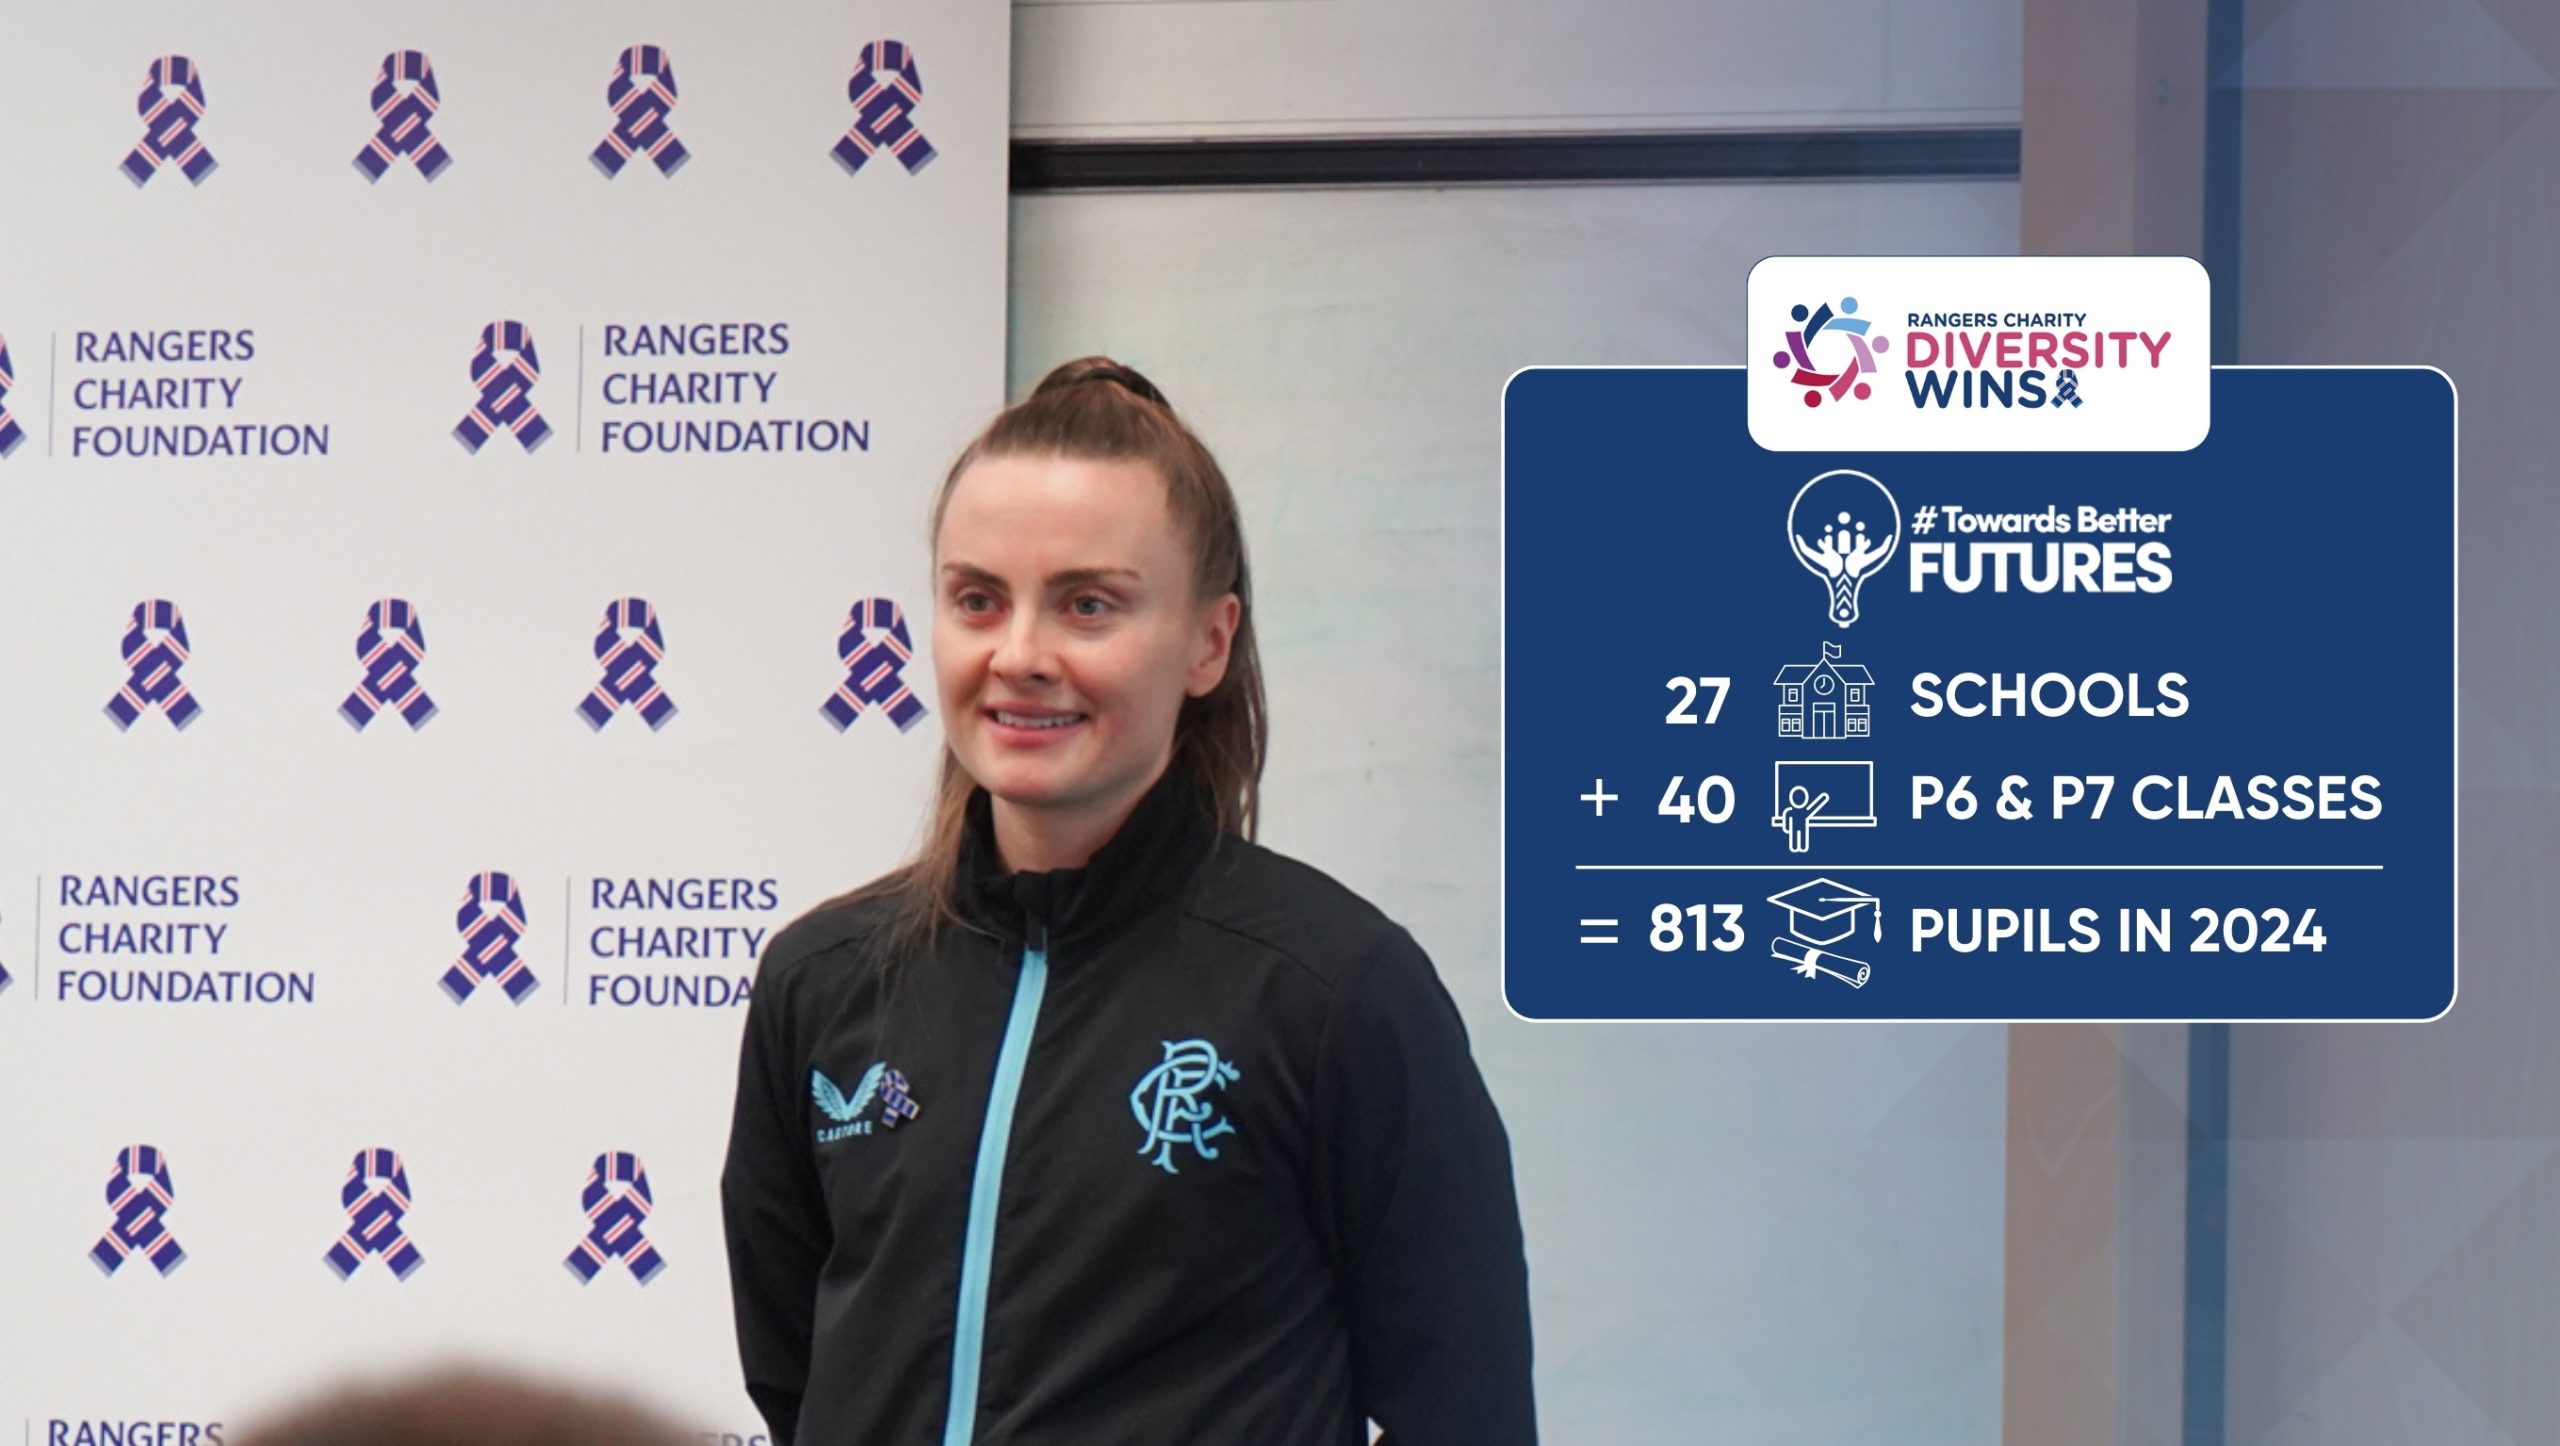 Kirsty Howat standing in front of Rangers Foundation Foundation Branding